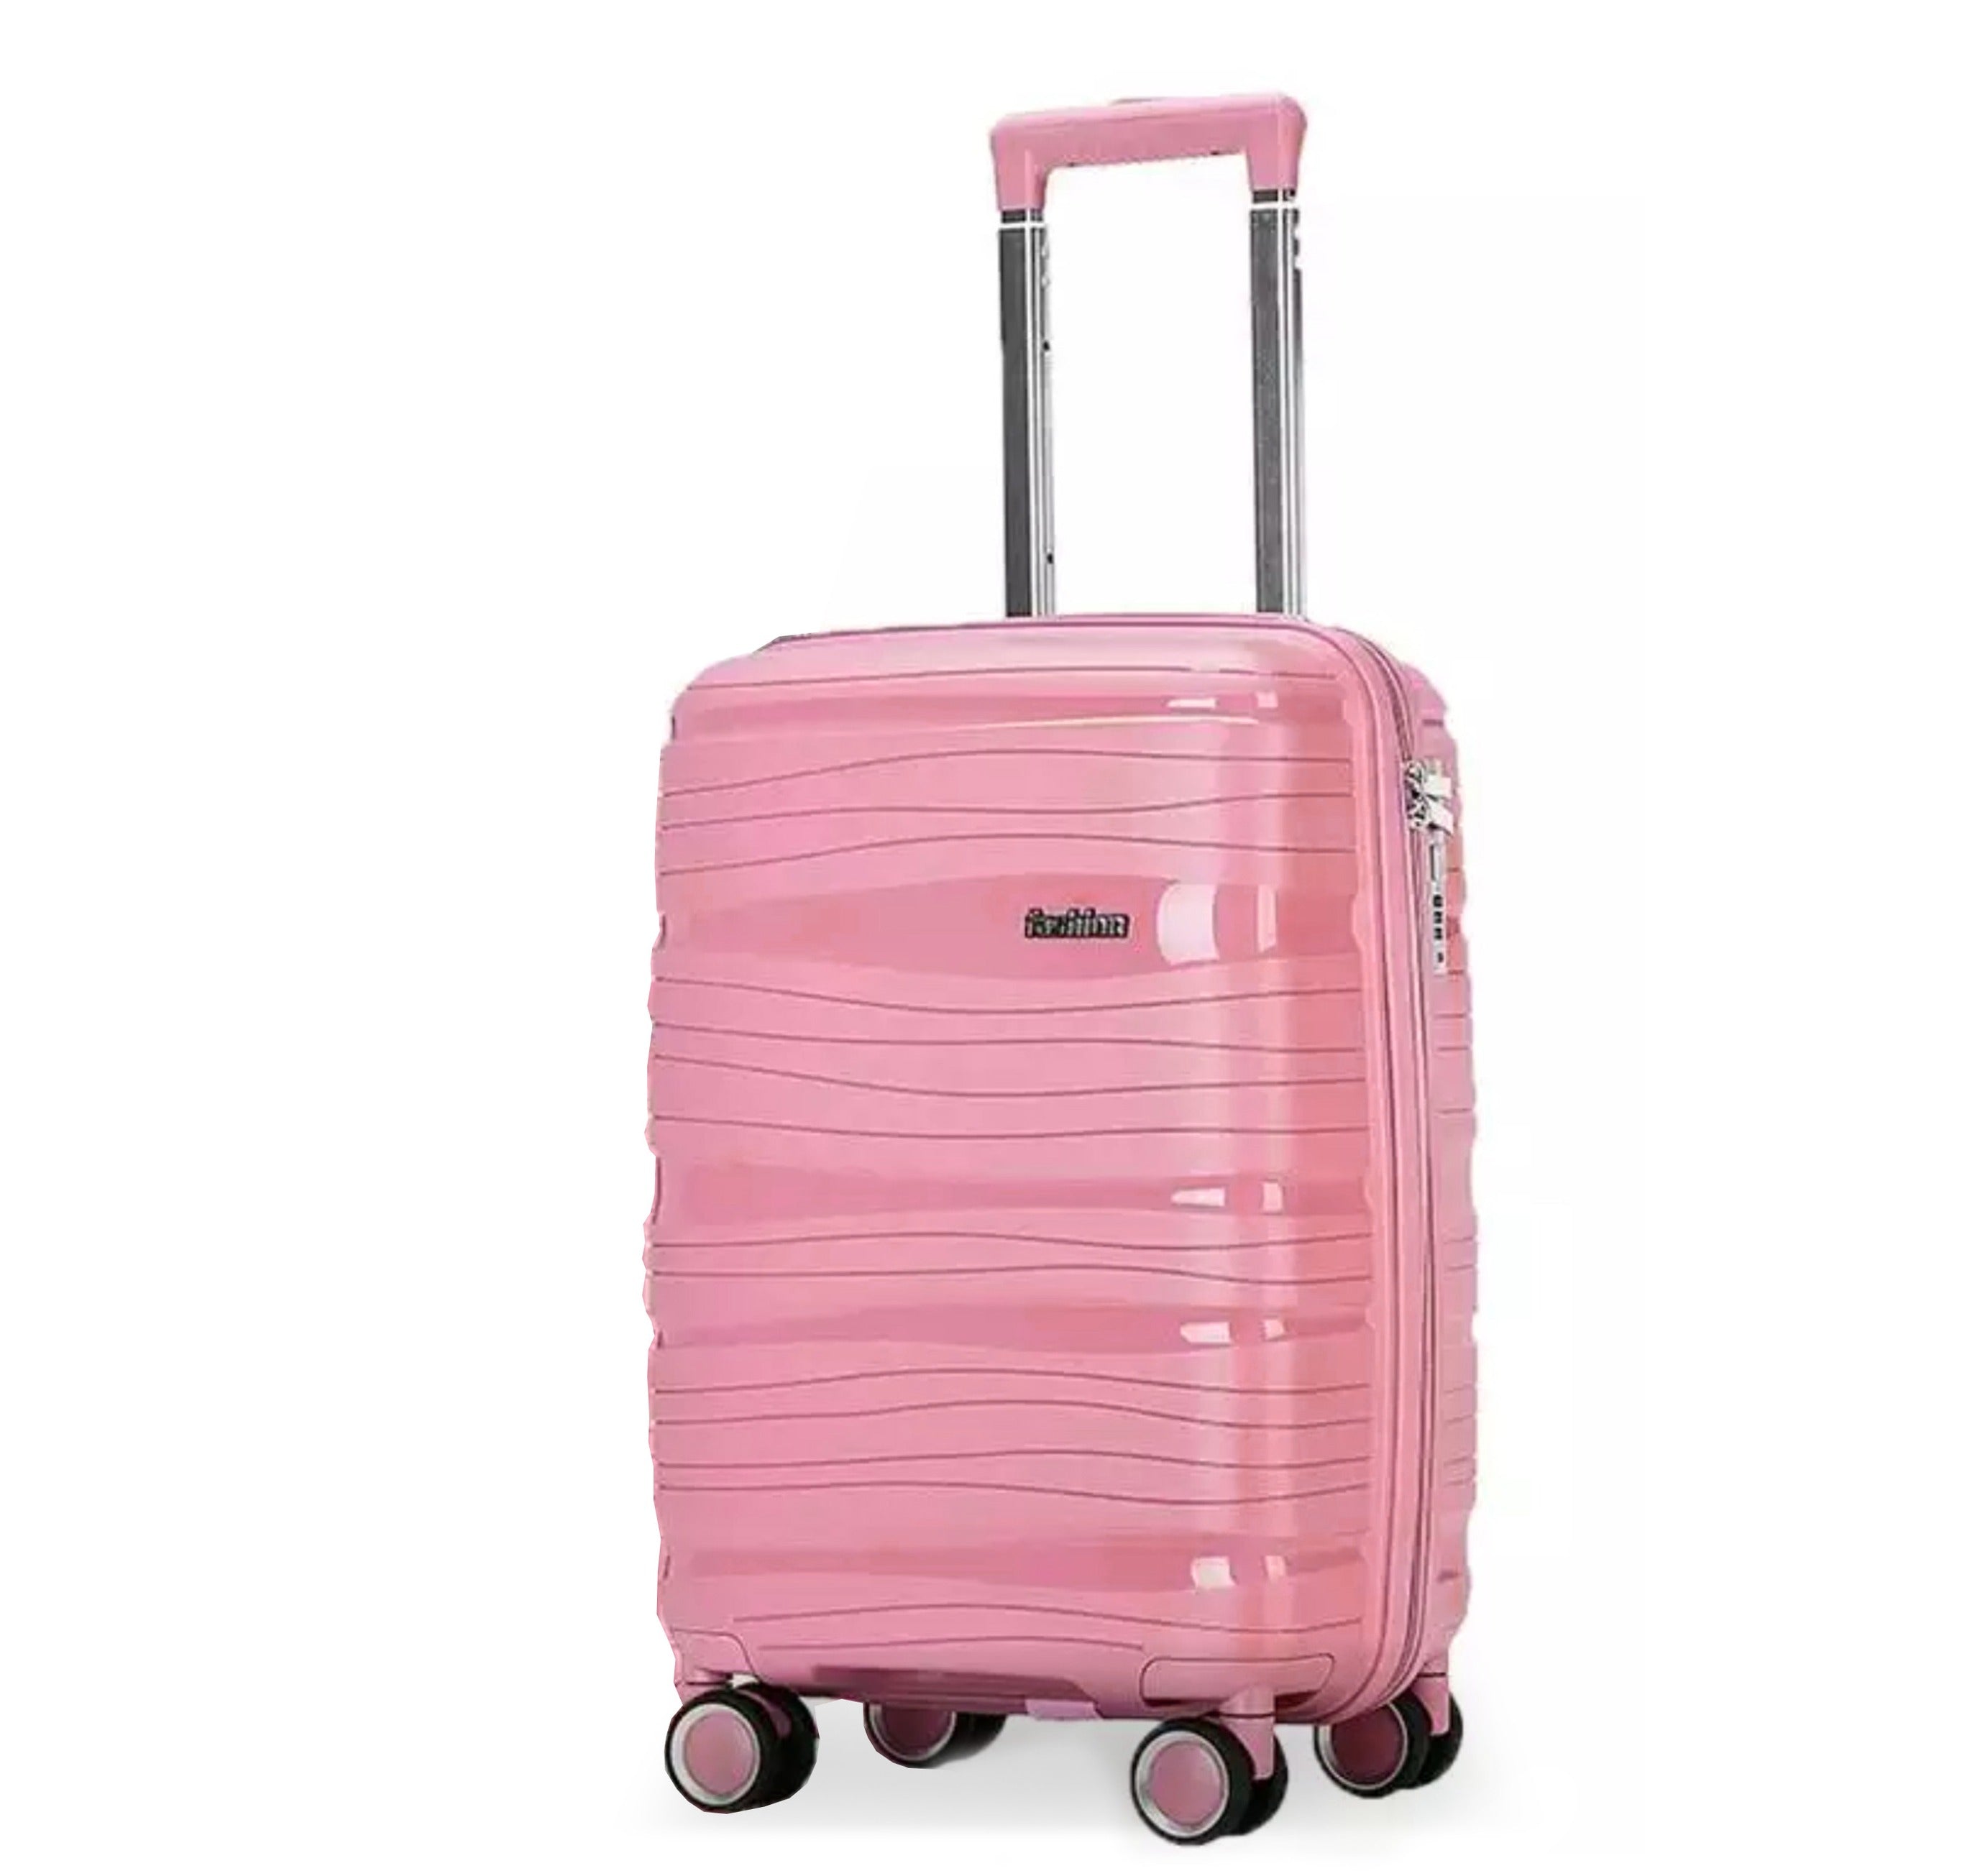 20" Light Pink Colour Royal PP Luggage Lightweight Hard Case Carry On Trolley Bag with Double Spinner Wheel